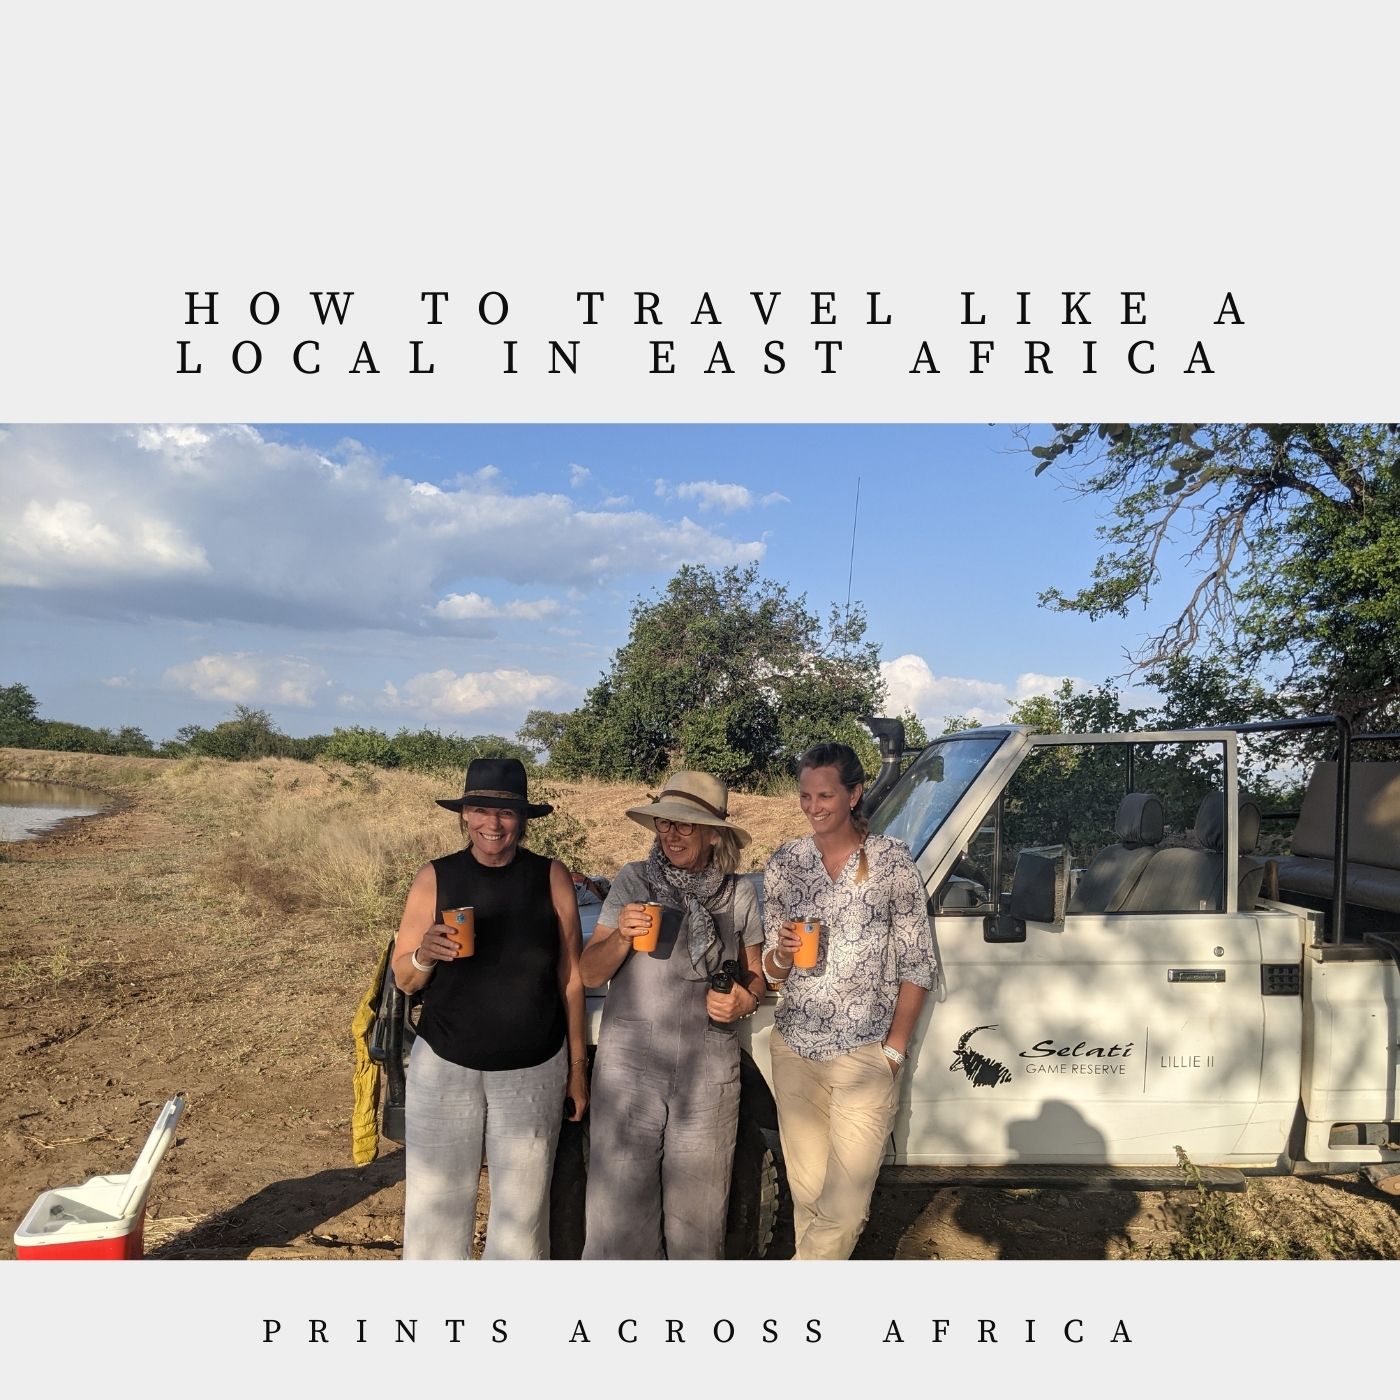 How to travel like a local in East Africa